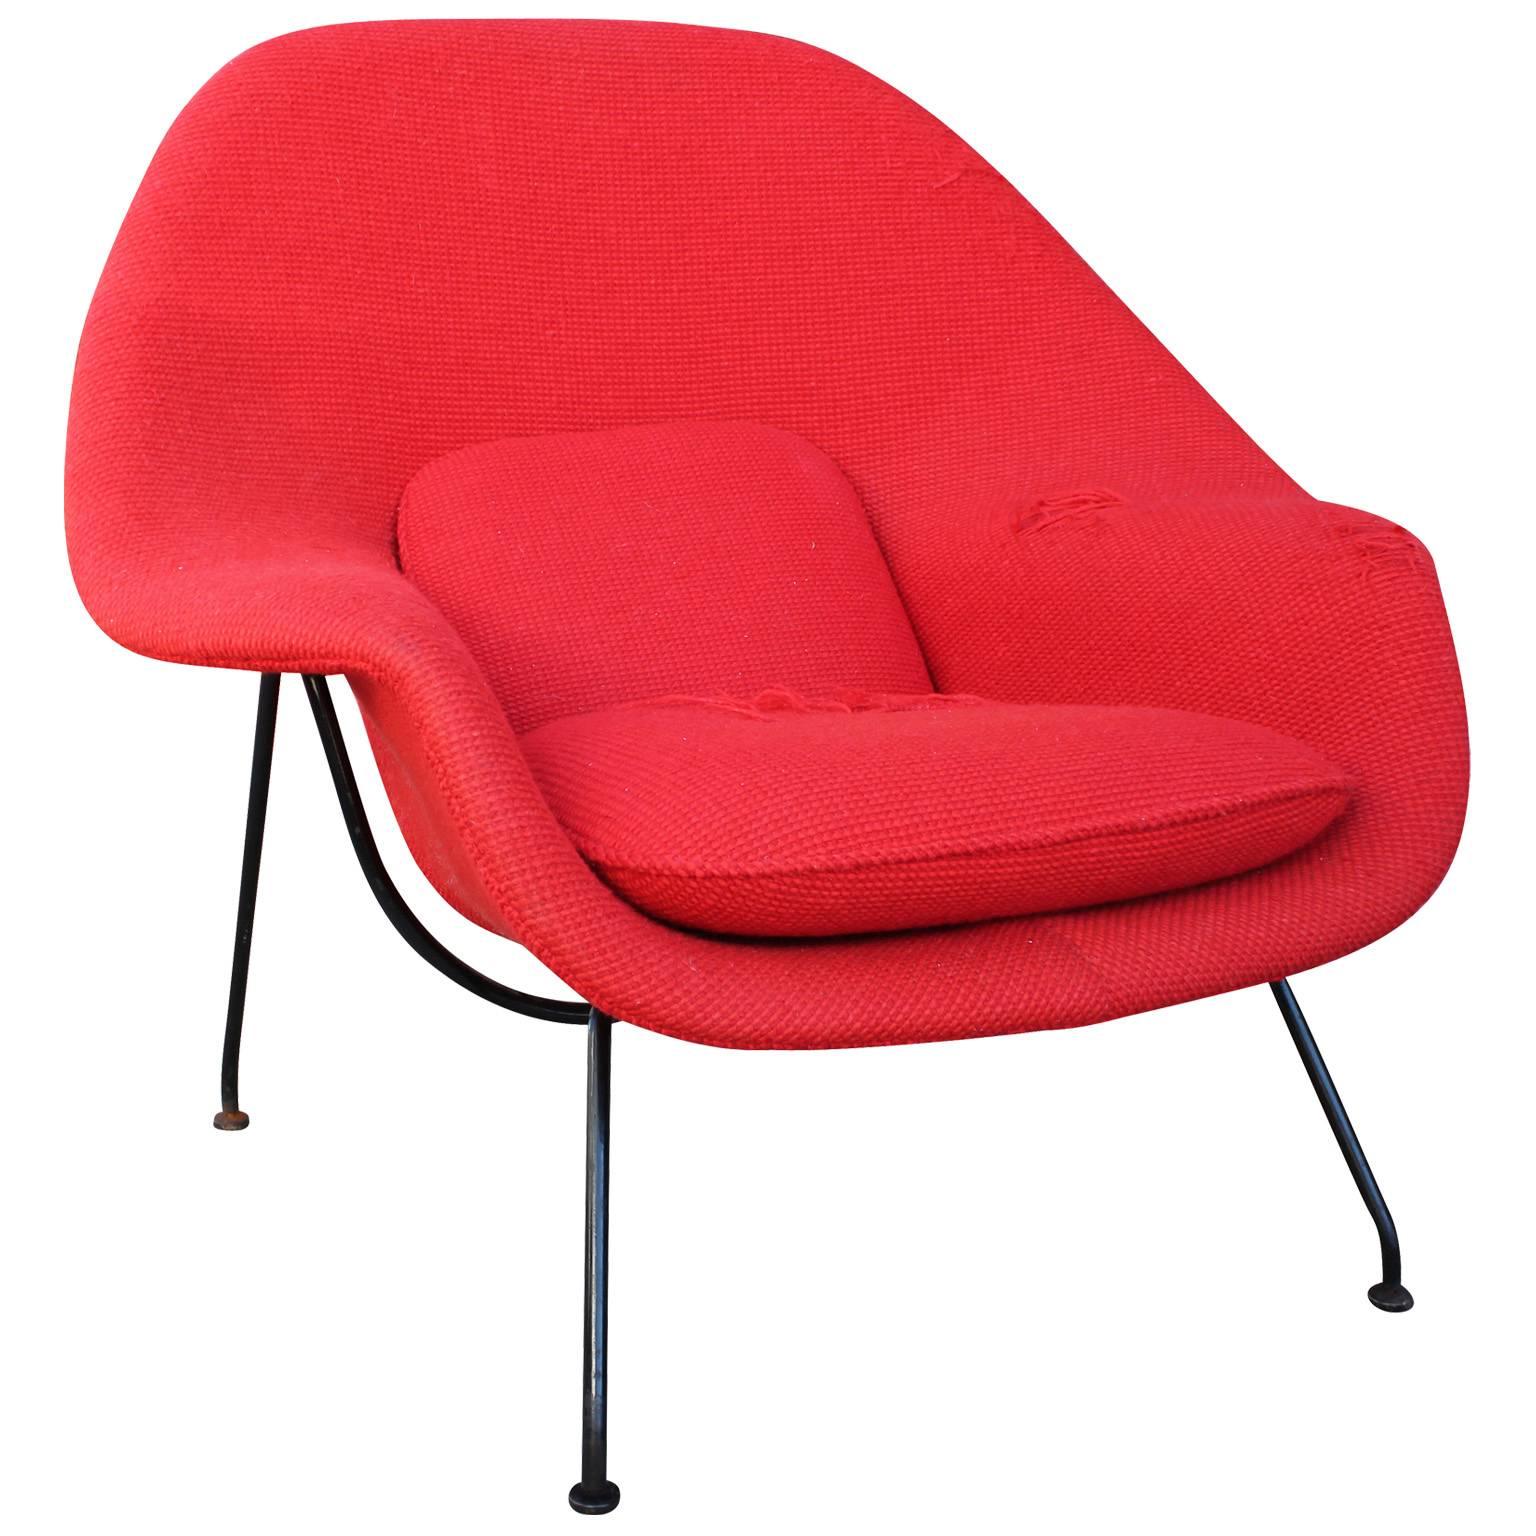 Original mid-1960s womb chair and ottoman designed by Eero Saarinen for Knoll in 1952. Frame is finished in original black powder coat. Red upholstery is original and in disrepair. Needs new upholstery. 
Ottoman measures: 16